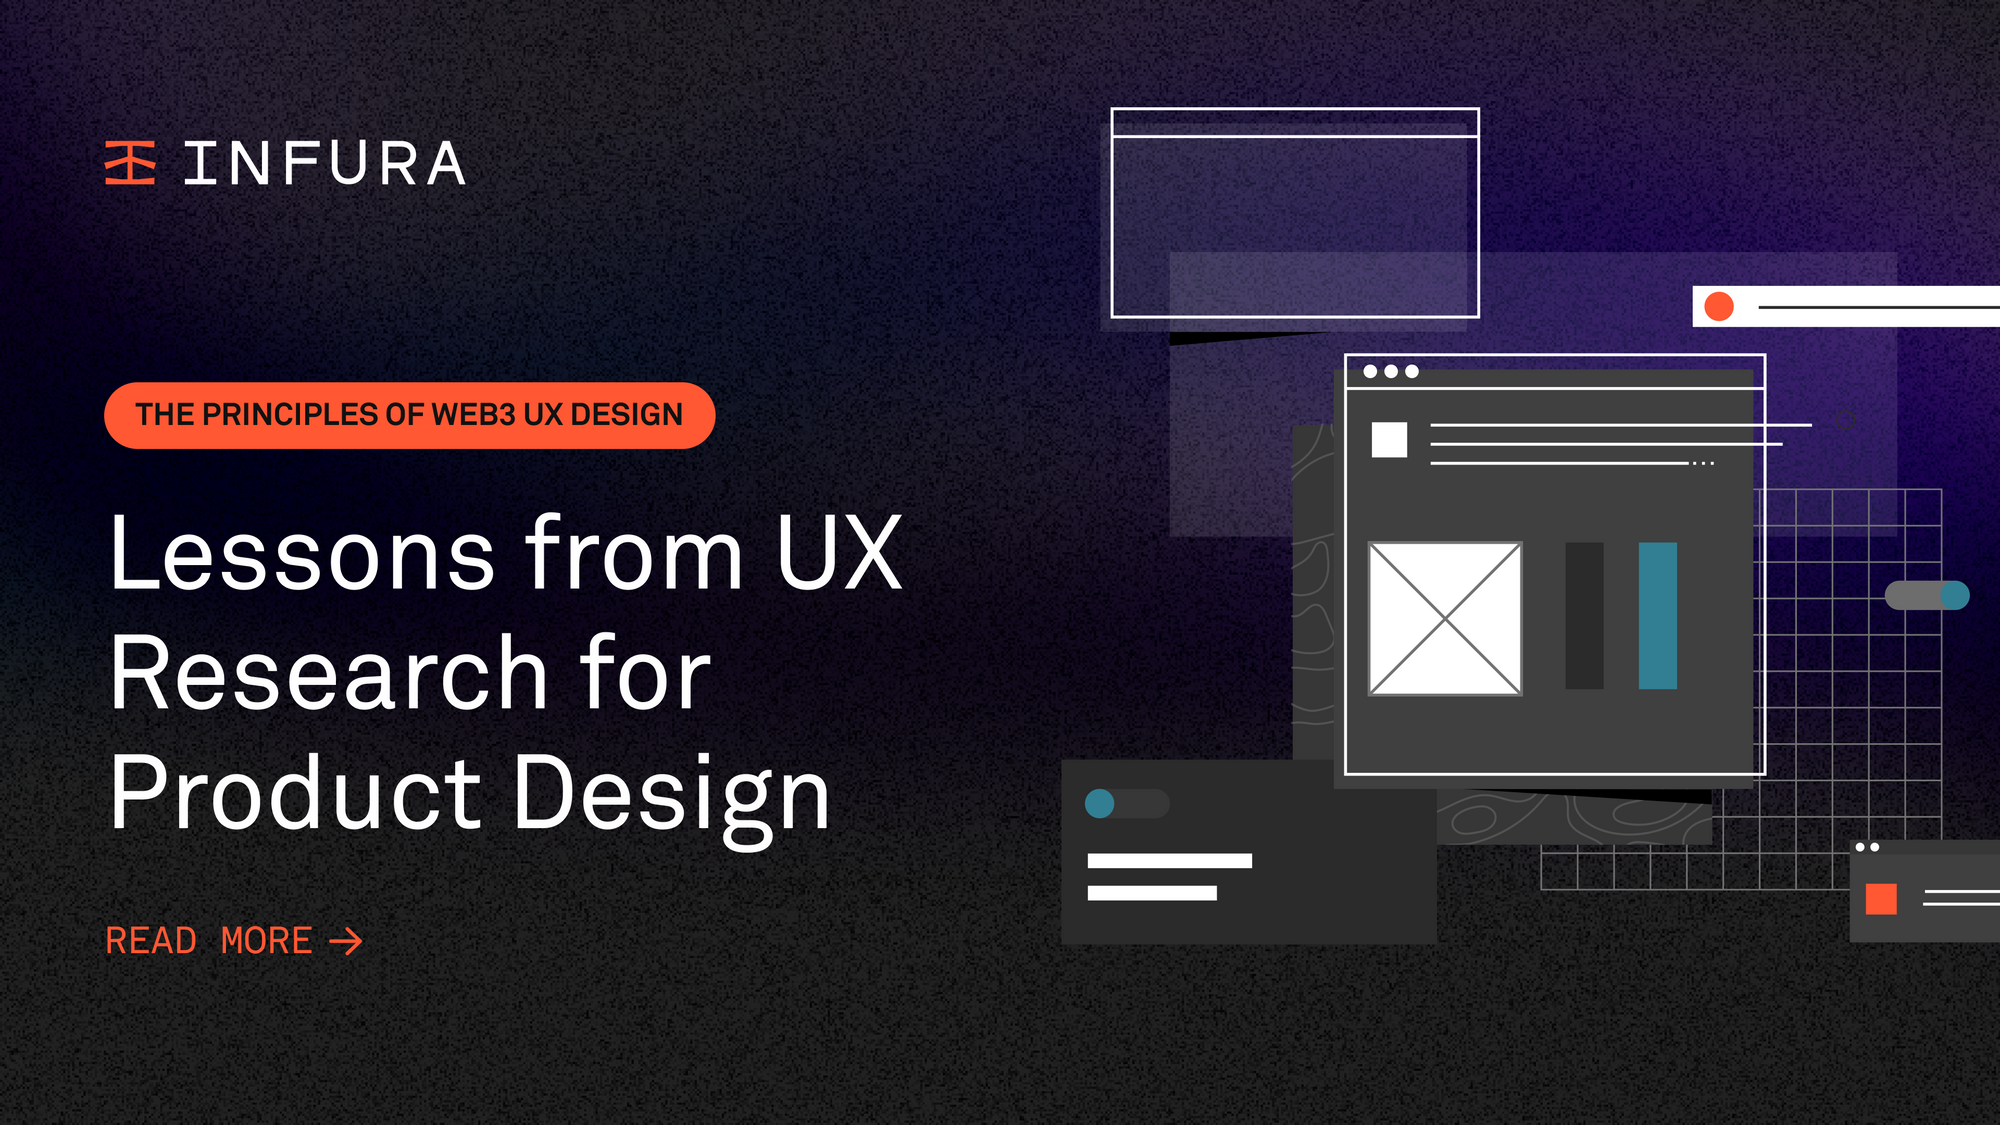 The Principles of Web3 UX Design Part 2: Lessons from UX Research for Product Design